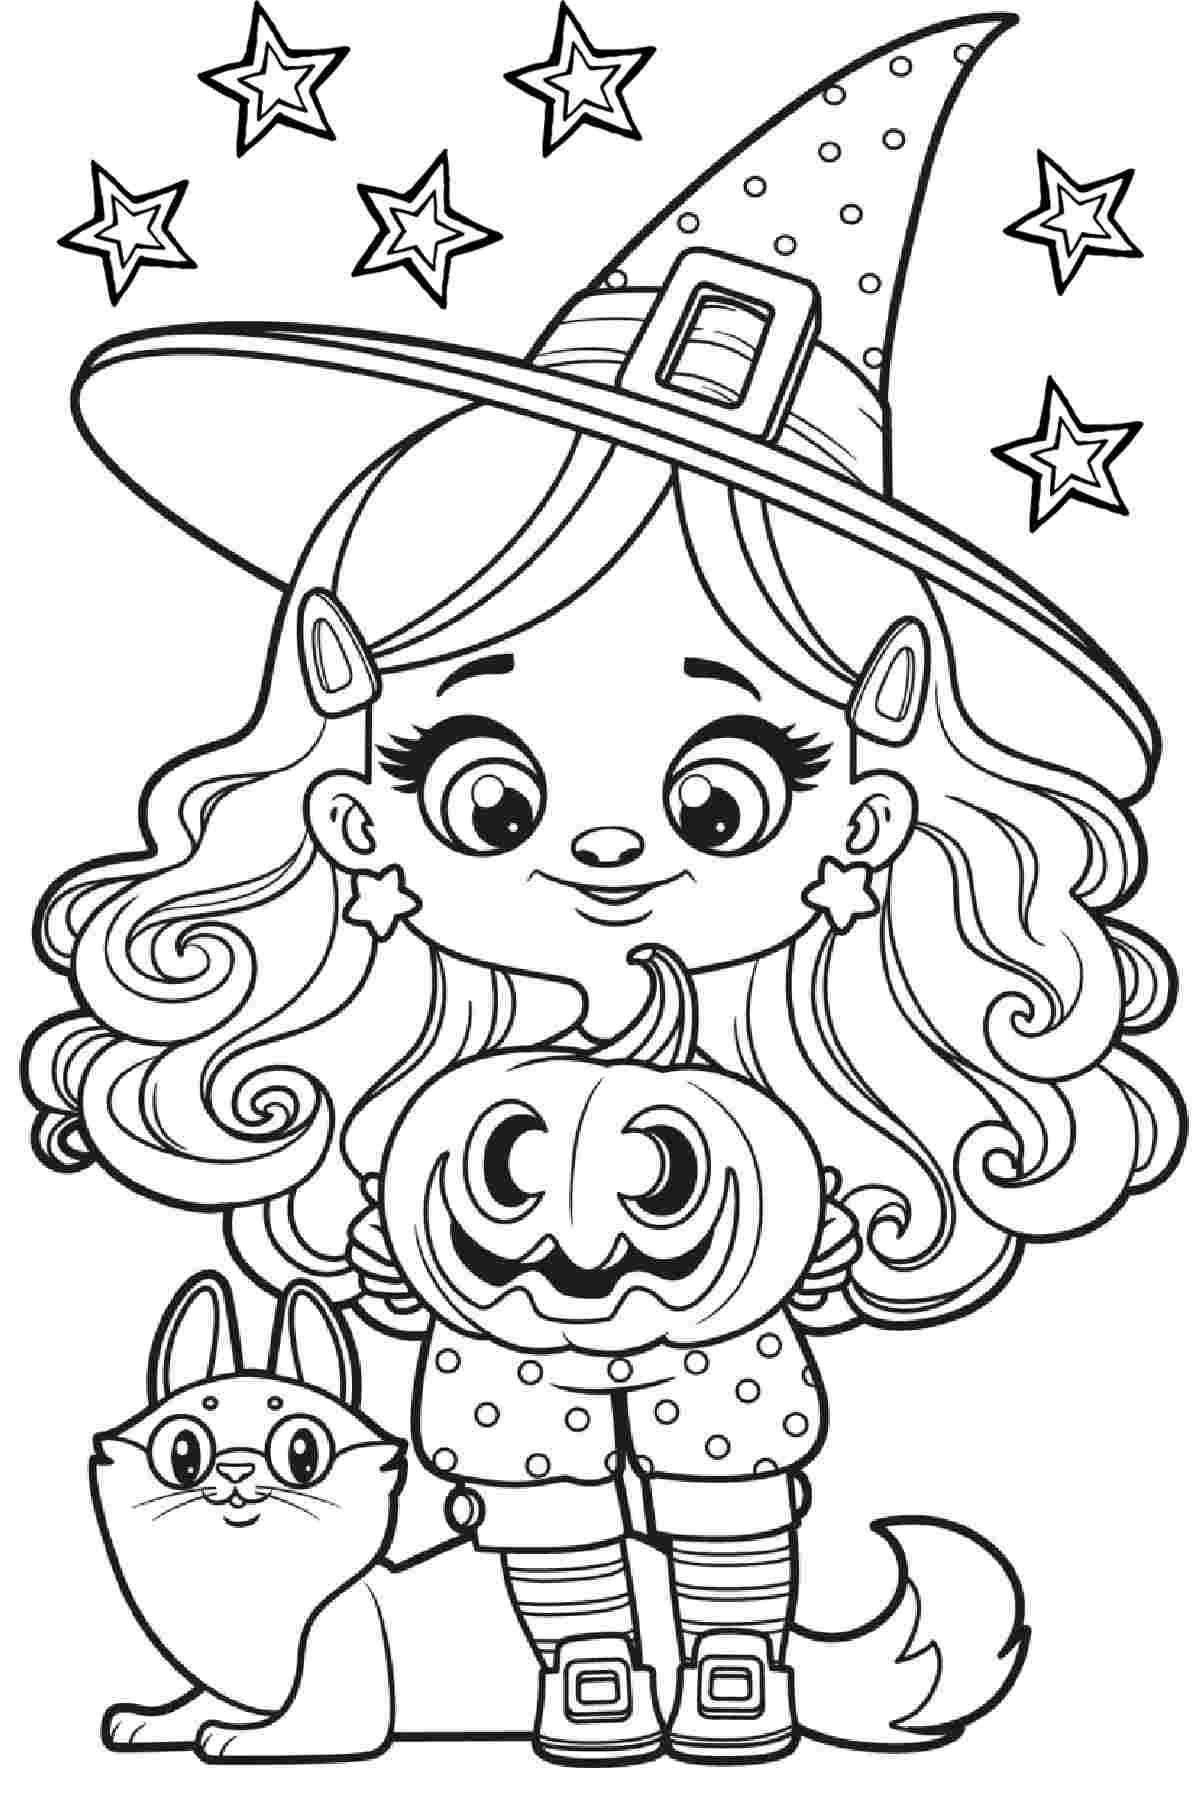 A seasonal printables coloring page, featuring a girl wearing a witches hat, holding a jack o lantern with a cat at her feet, and stars above her head.